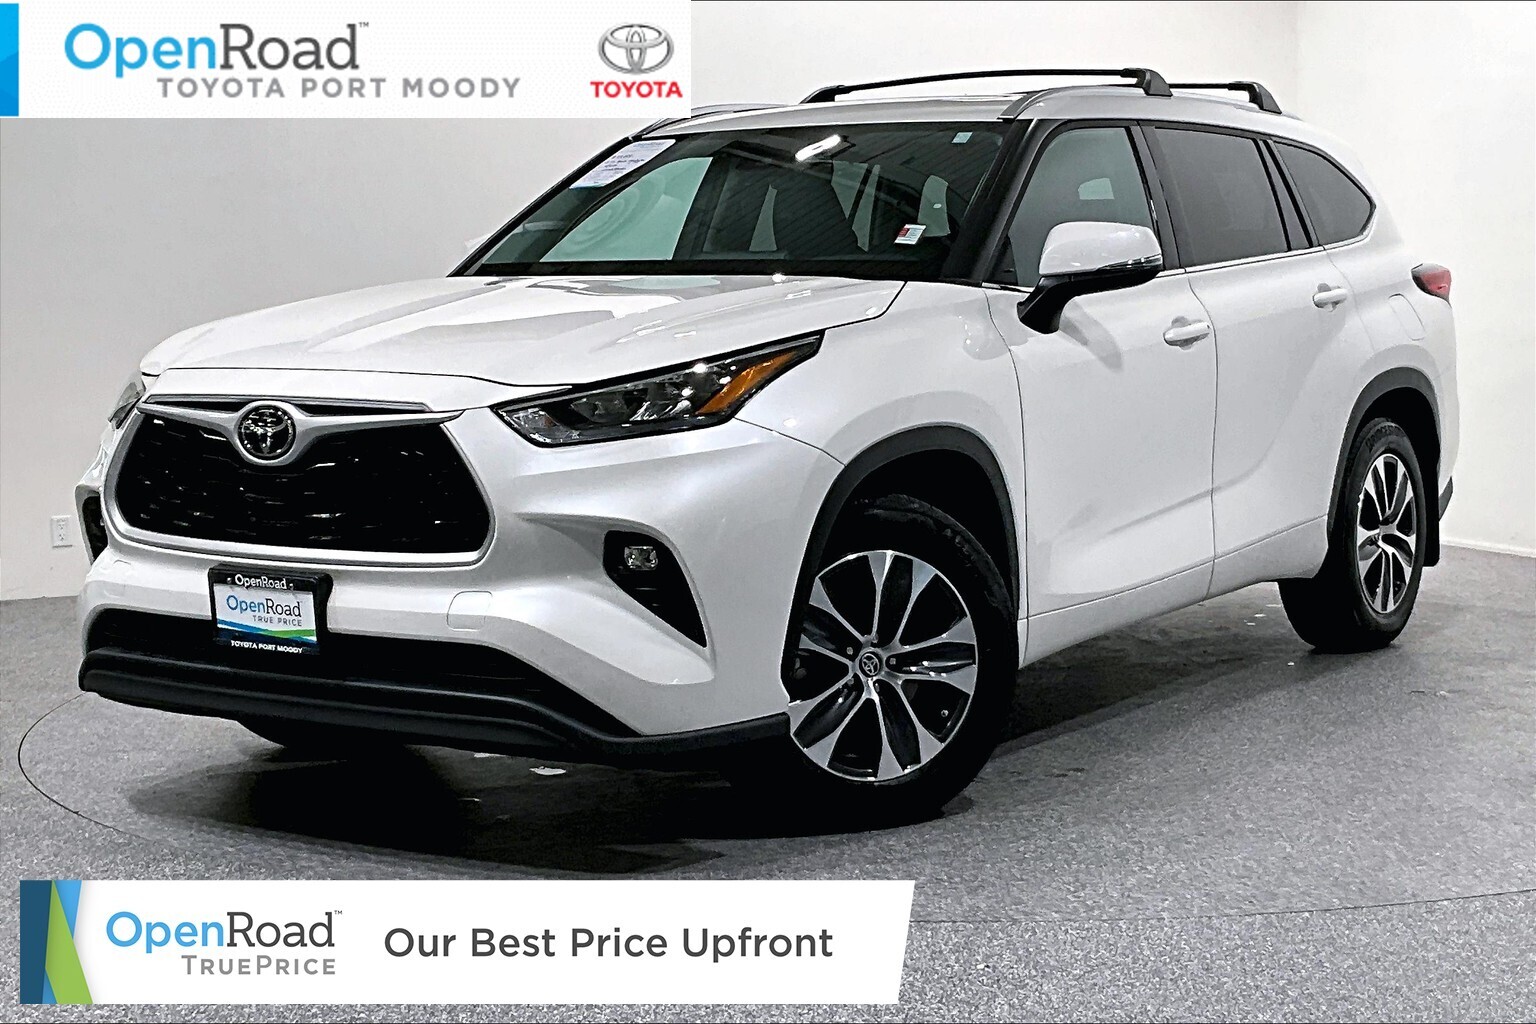 2021 Toyota Highlander XLE AWD |OpenRoad True Price |Local |One Owner |Se